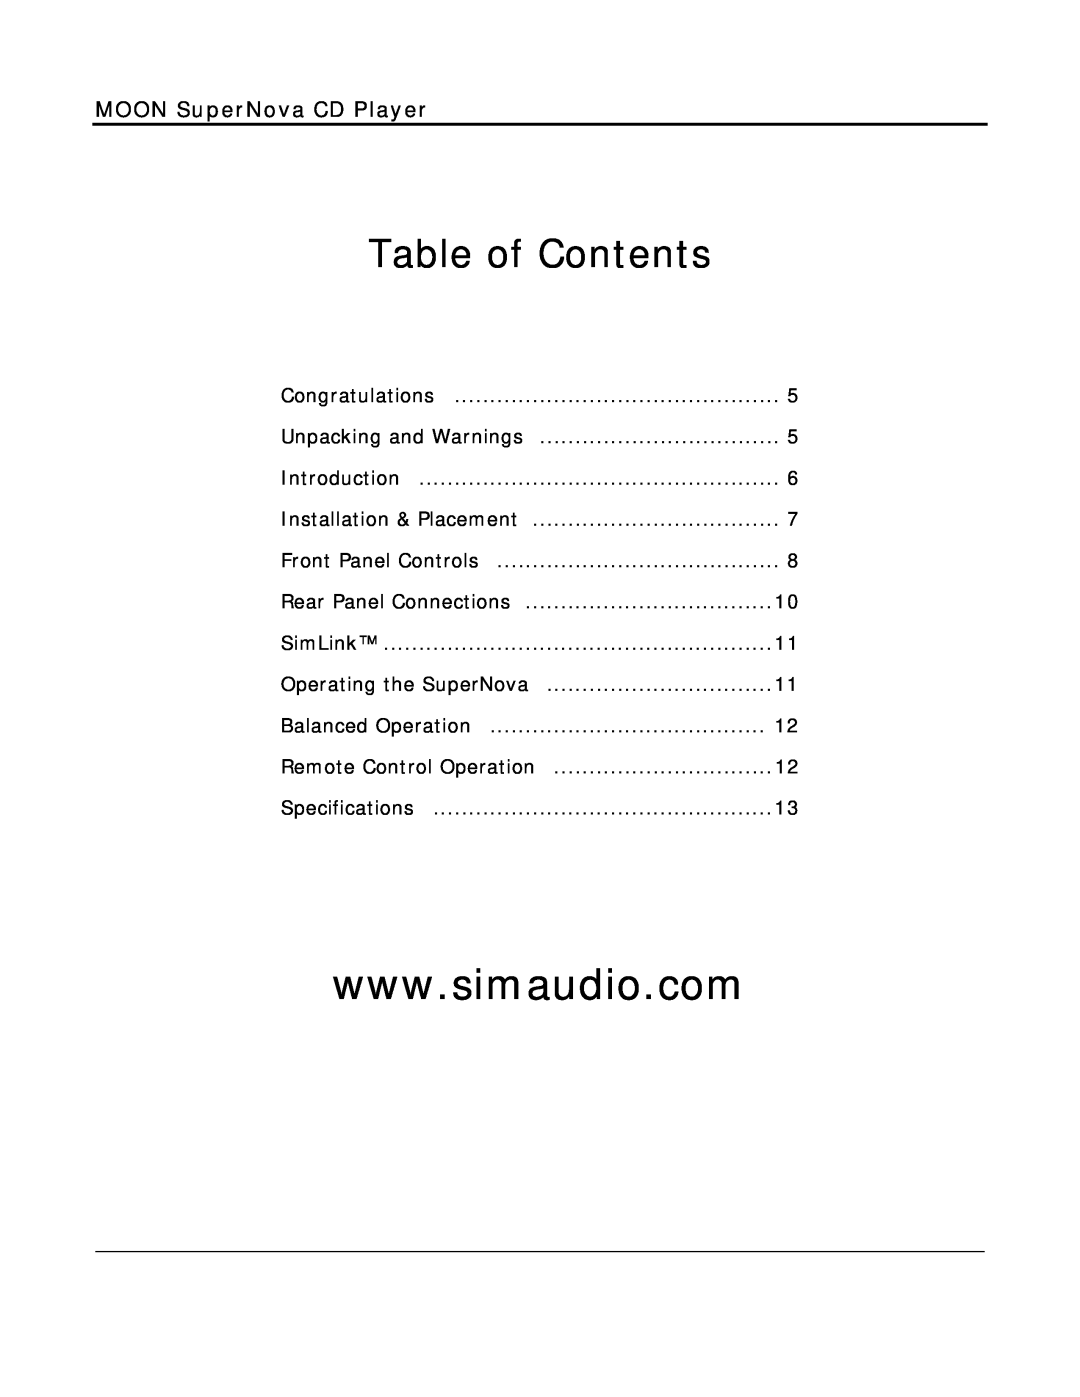 Simaudio owner manual Table of Contents, MOON SuperNova CD Player 